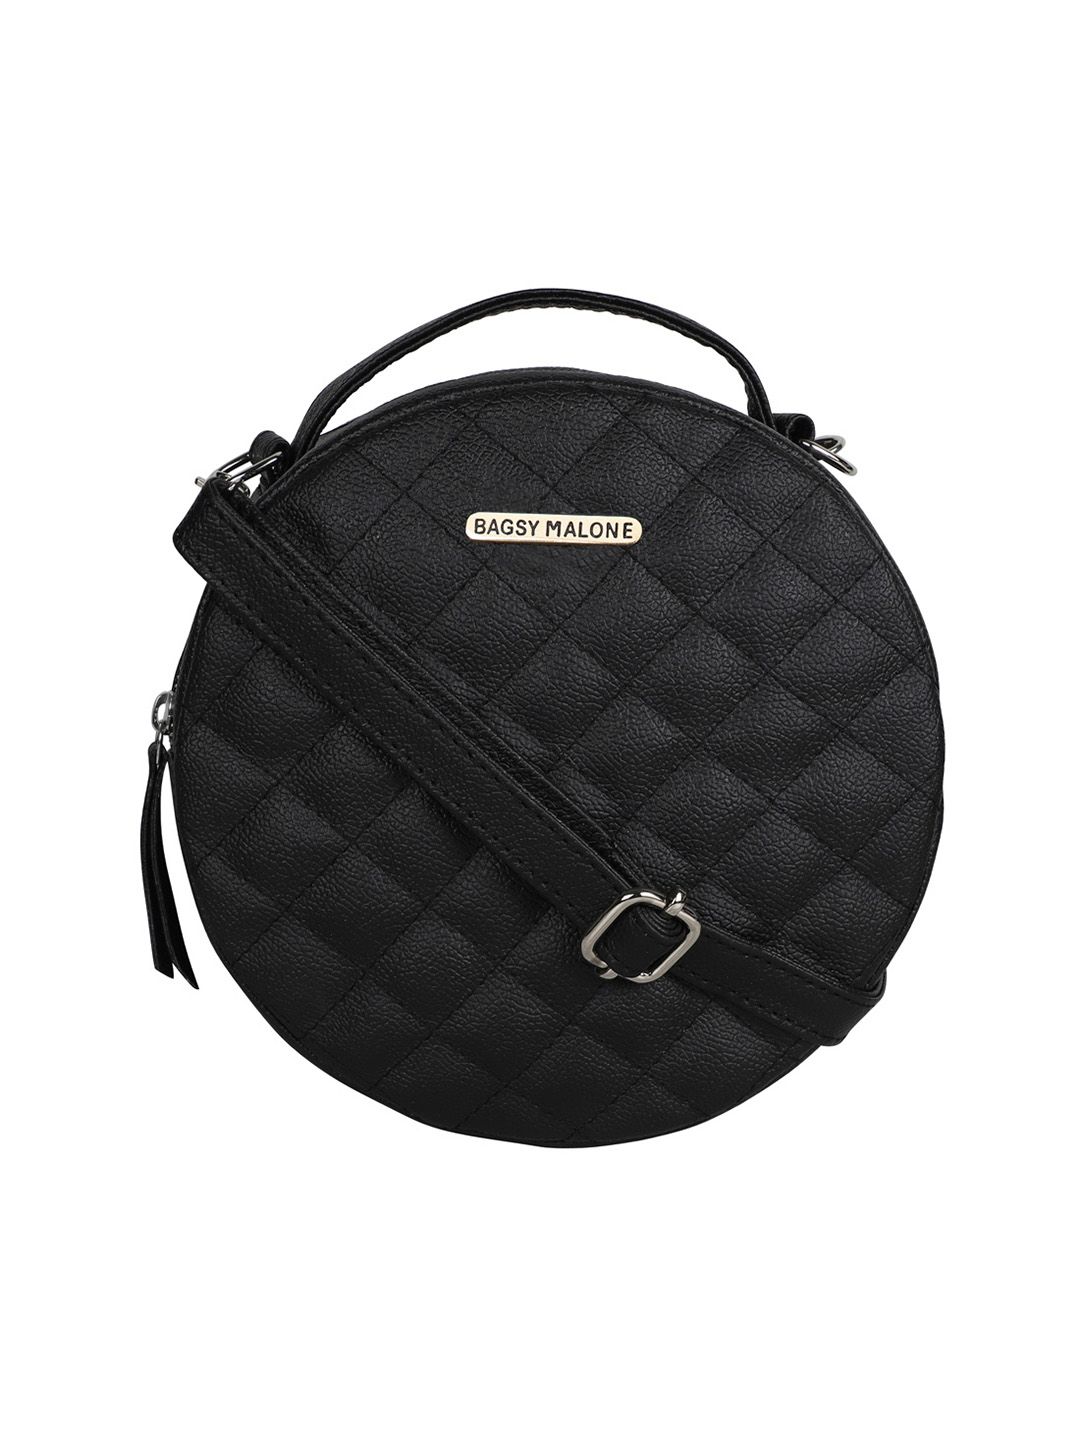 Bagsy Malone Black Quilted Sling Bag Price in India